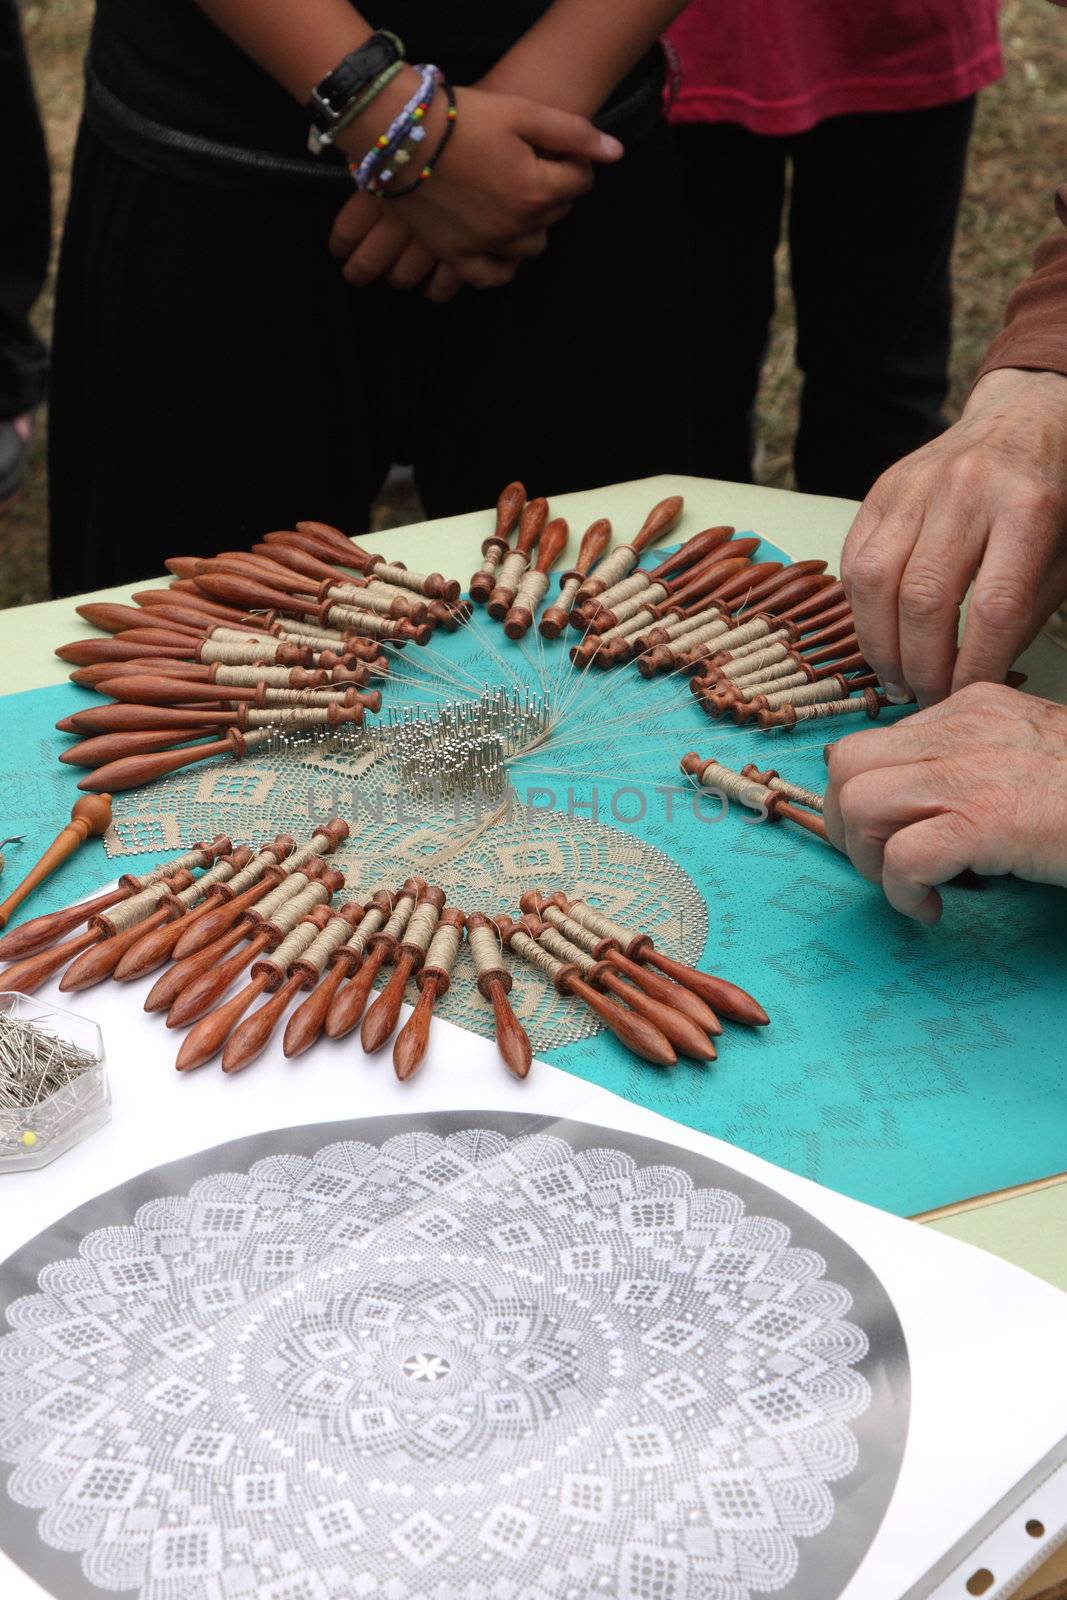 Process of lace-making with bobbins  by jp_chretien